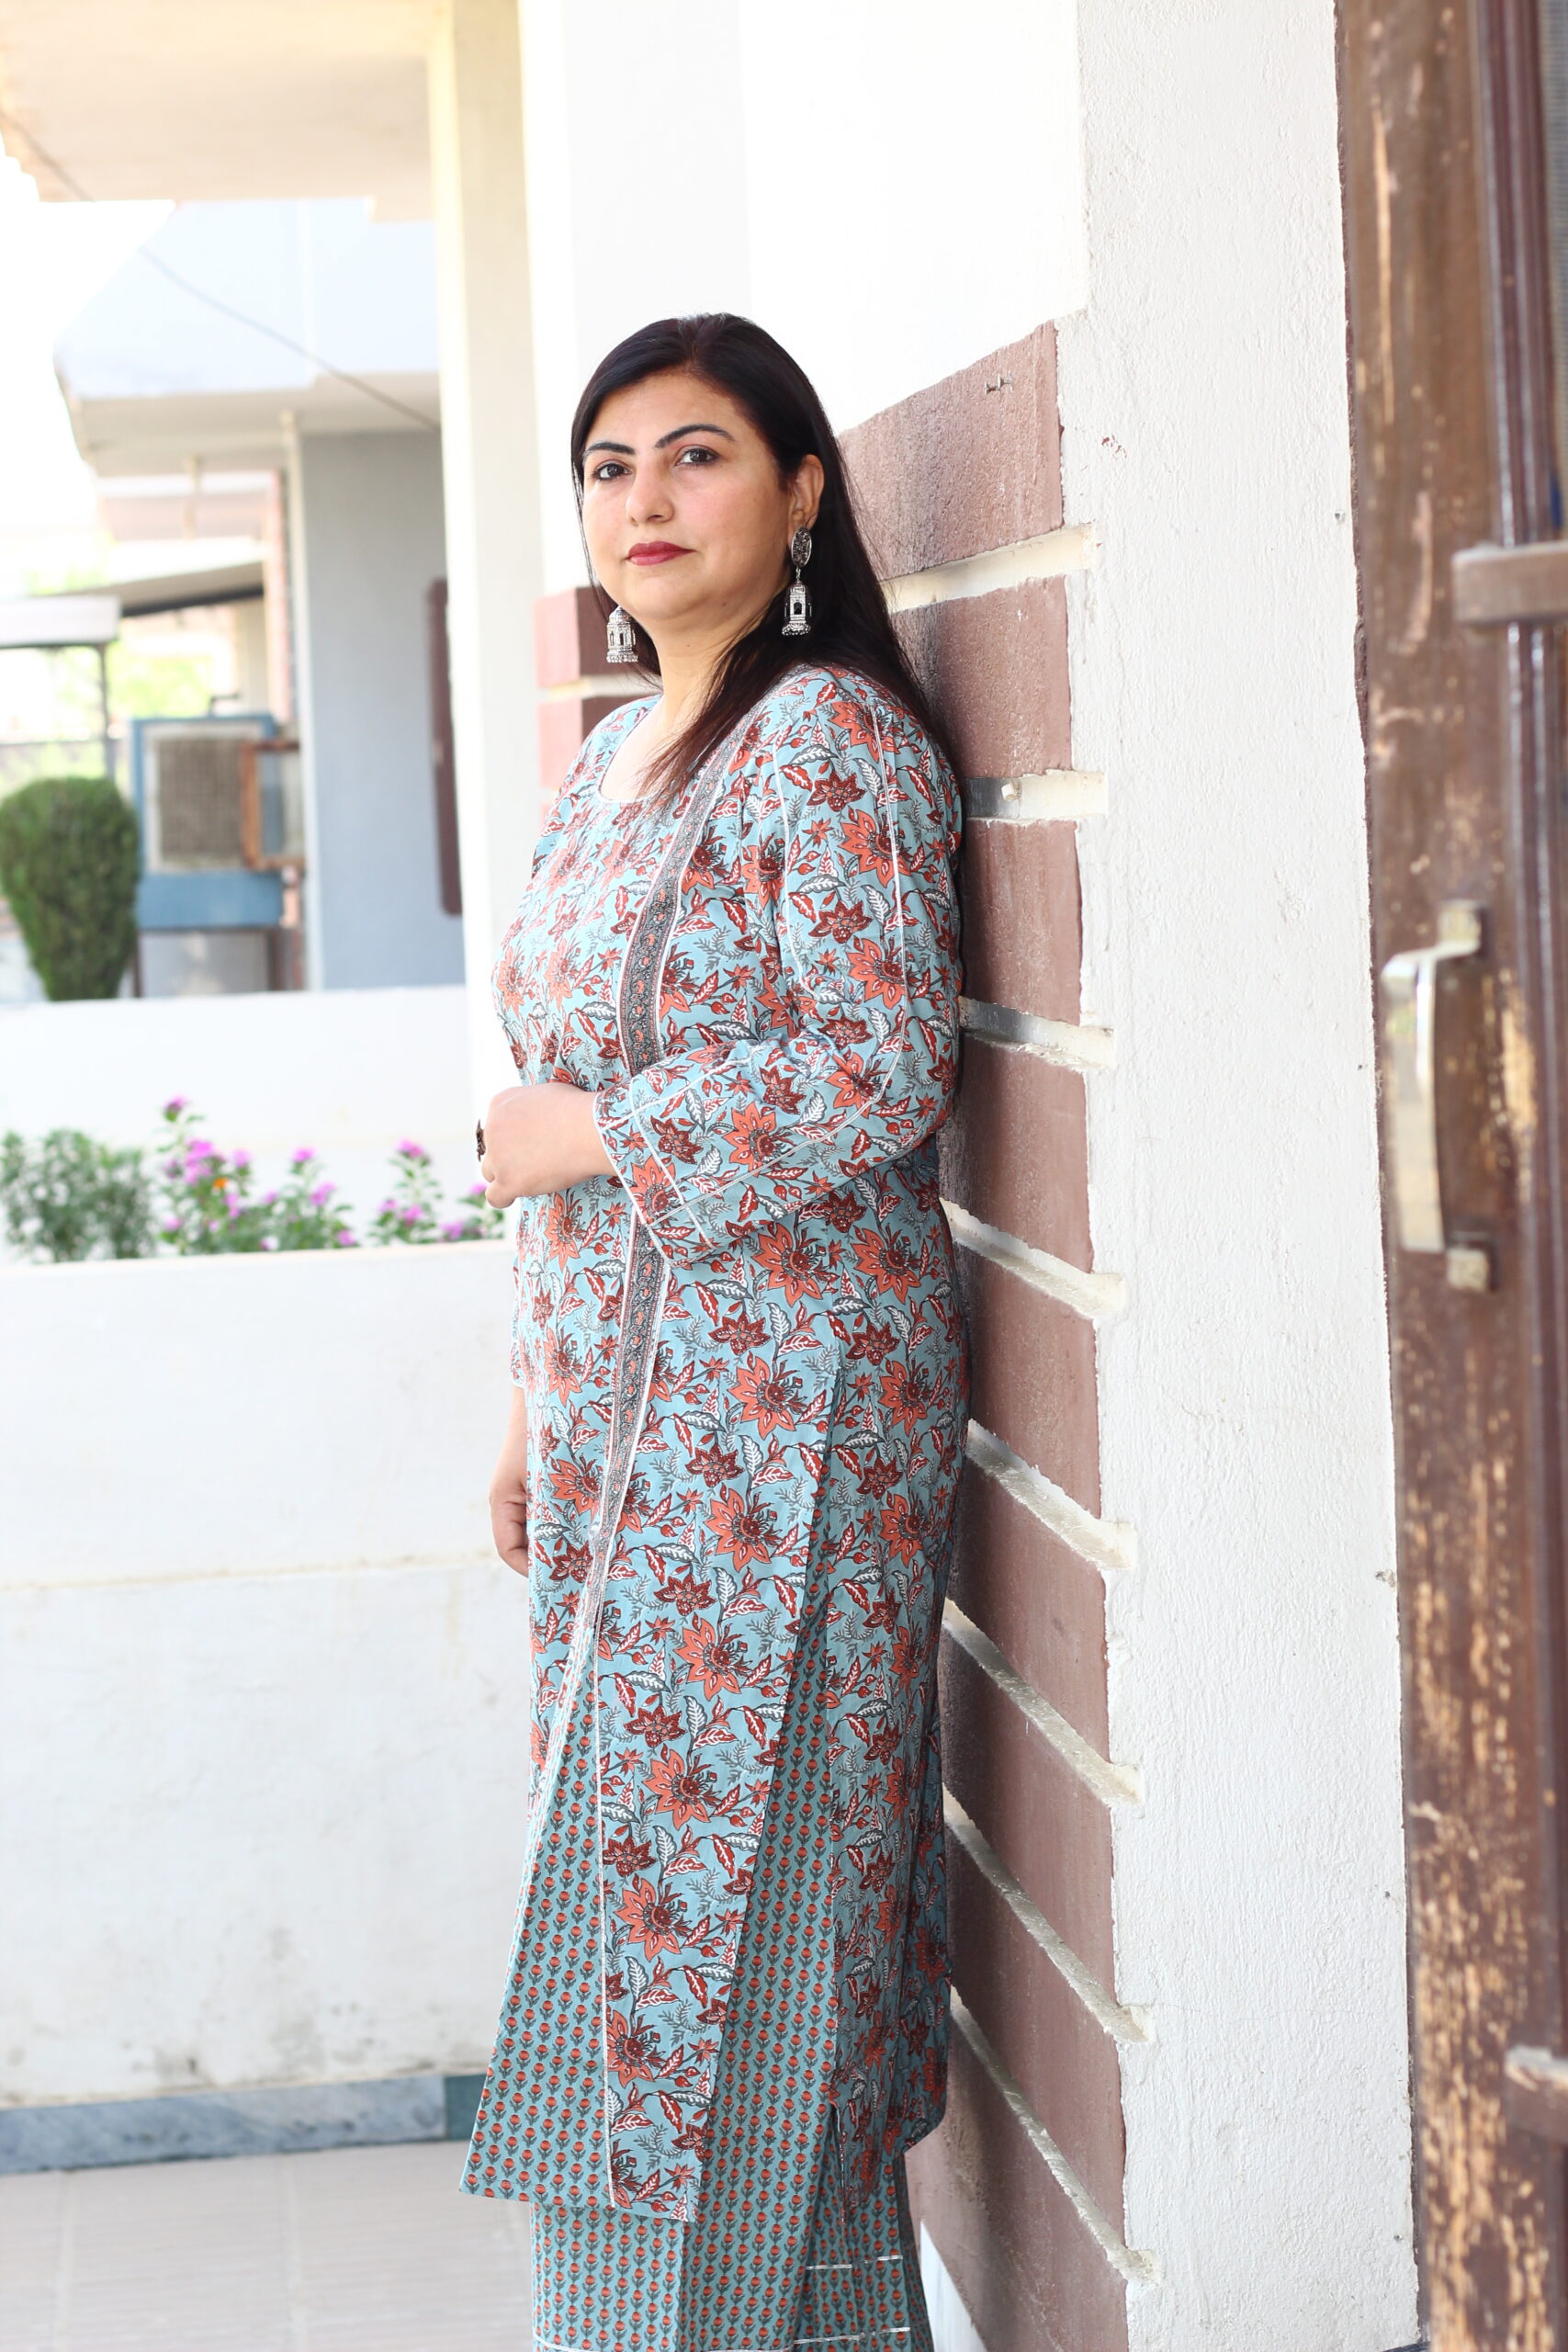 Blue & White Floral Print Plus Size Ethnic Tunic with Palazzos